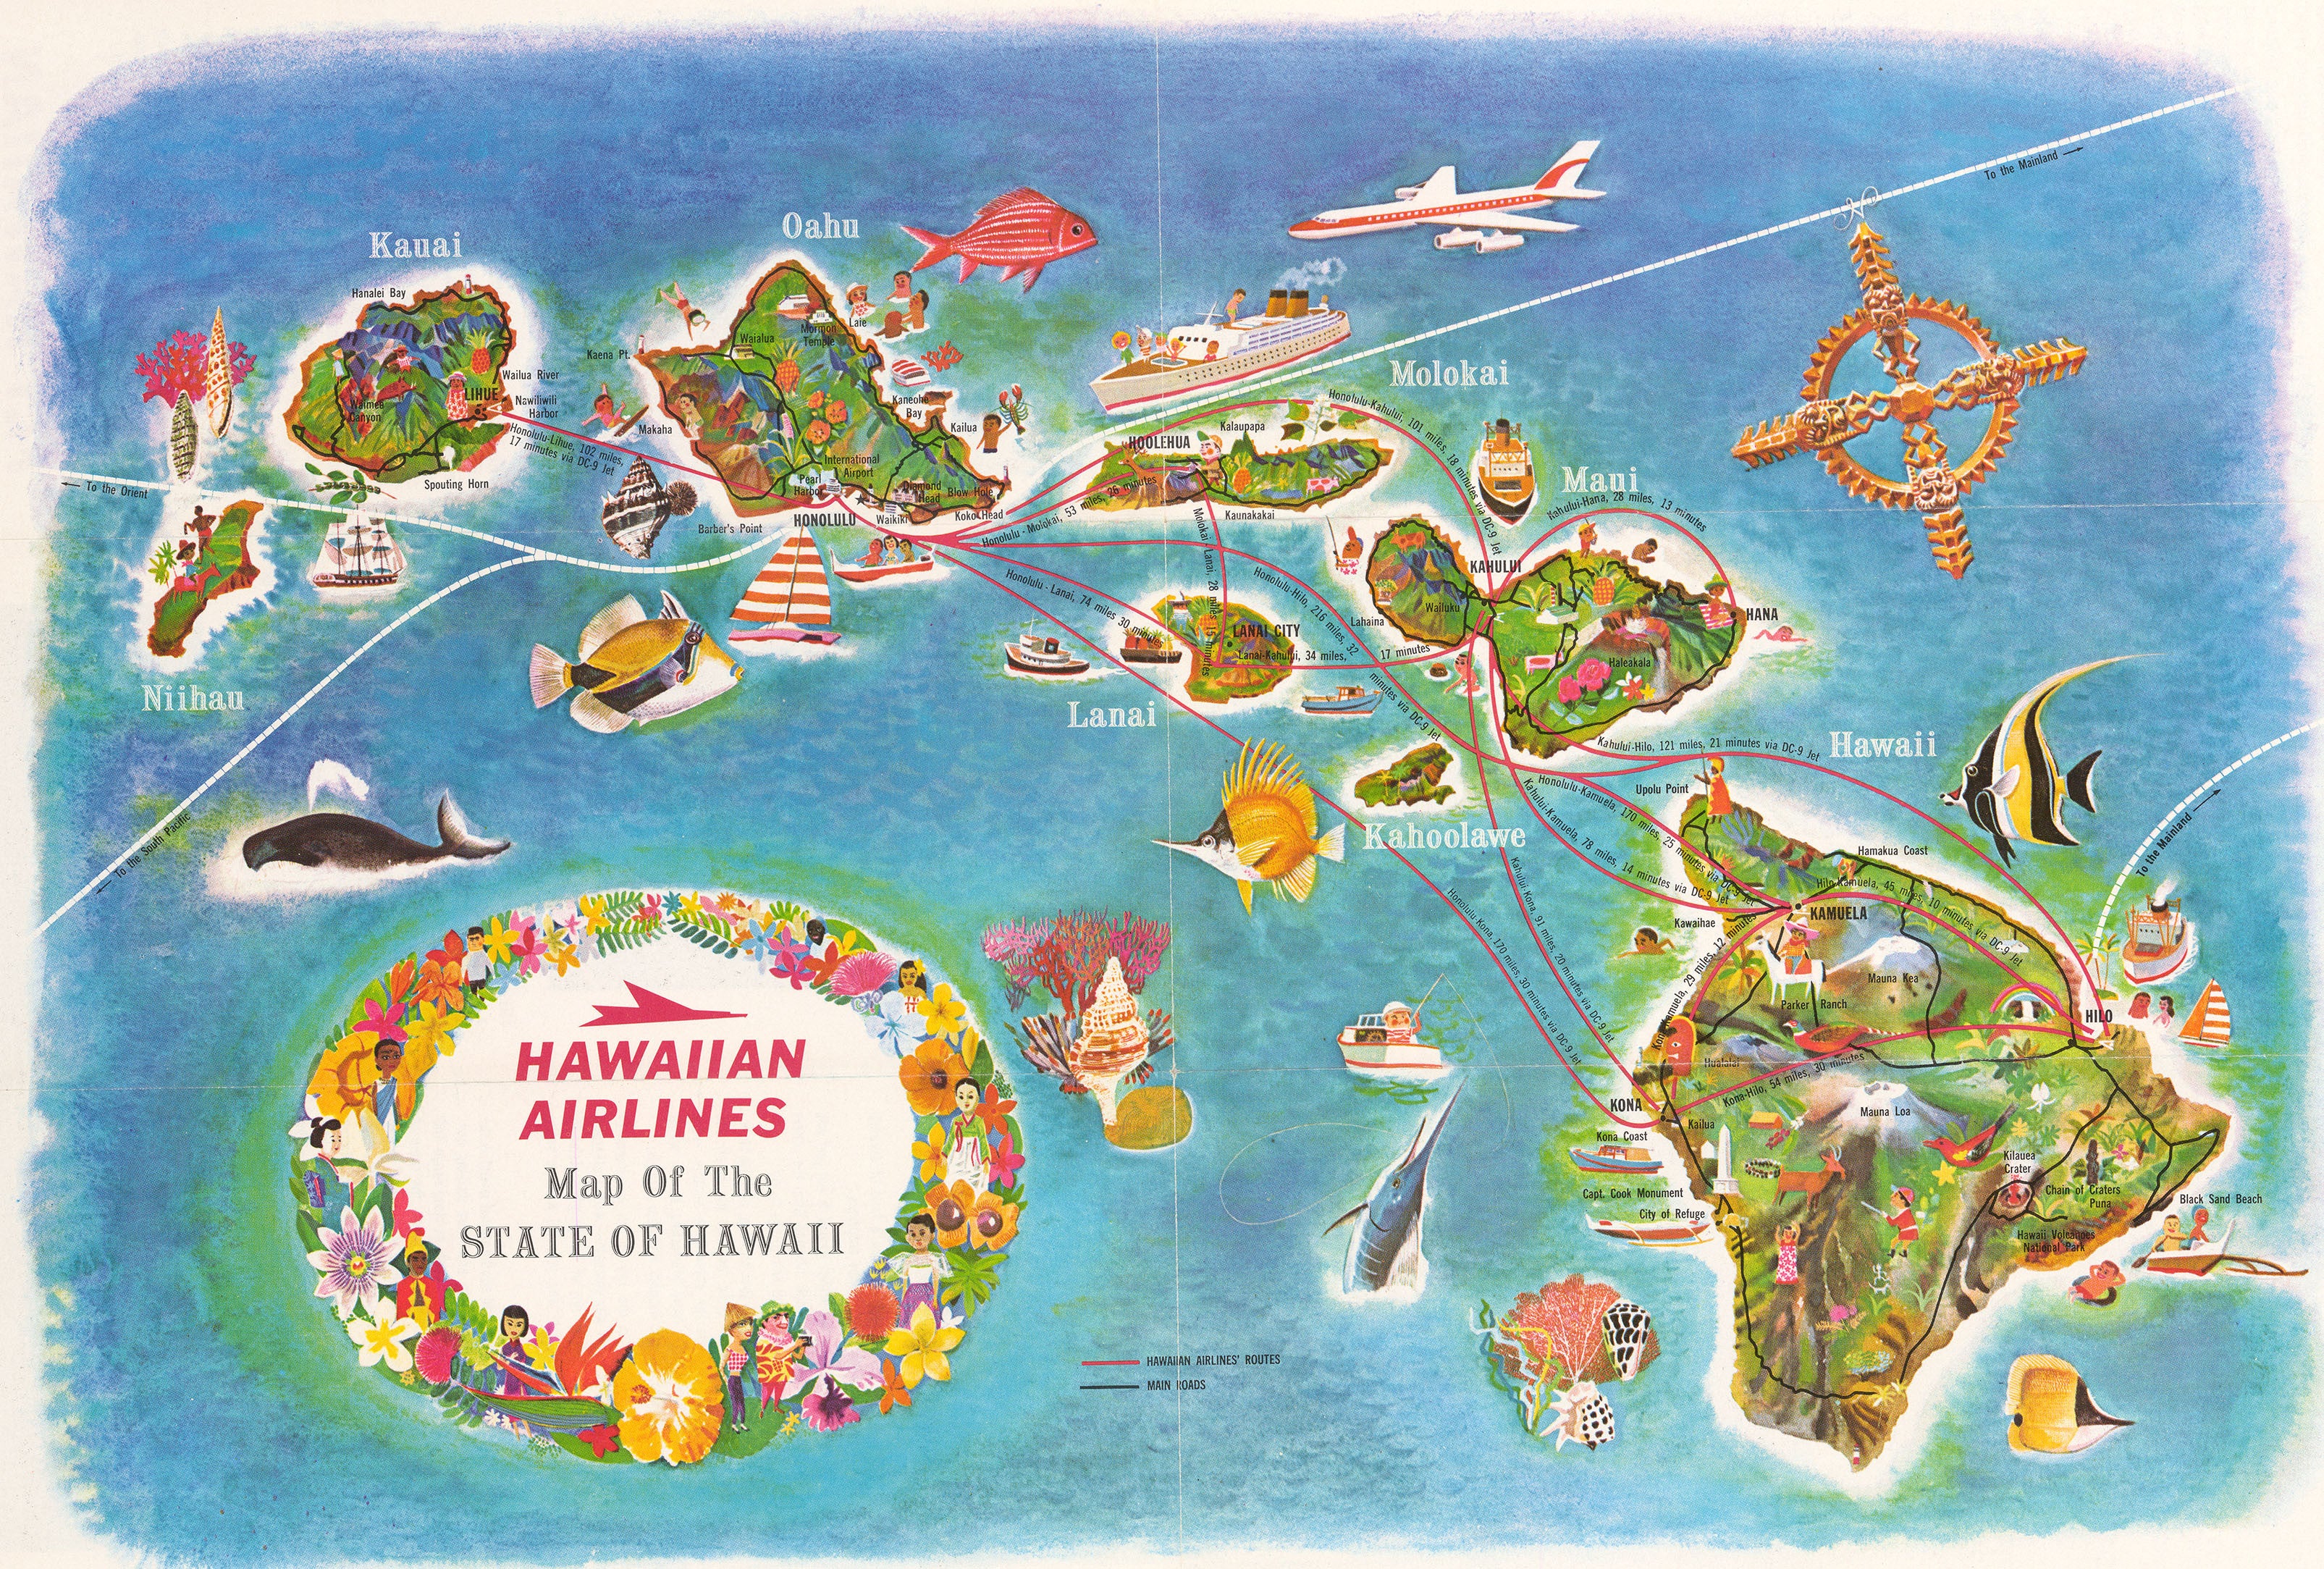 1960 Hawaiian Airlines – Map of the State of Hawaii : nwcartographic